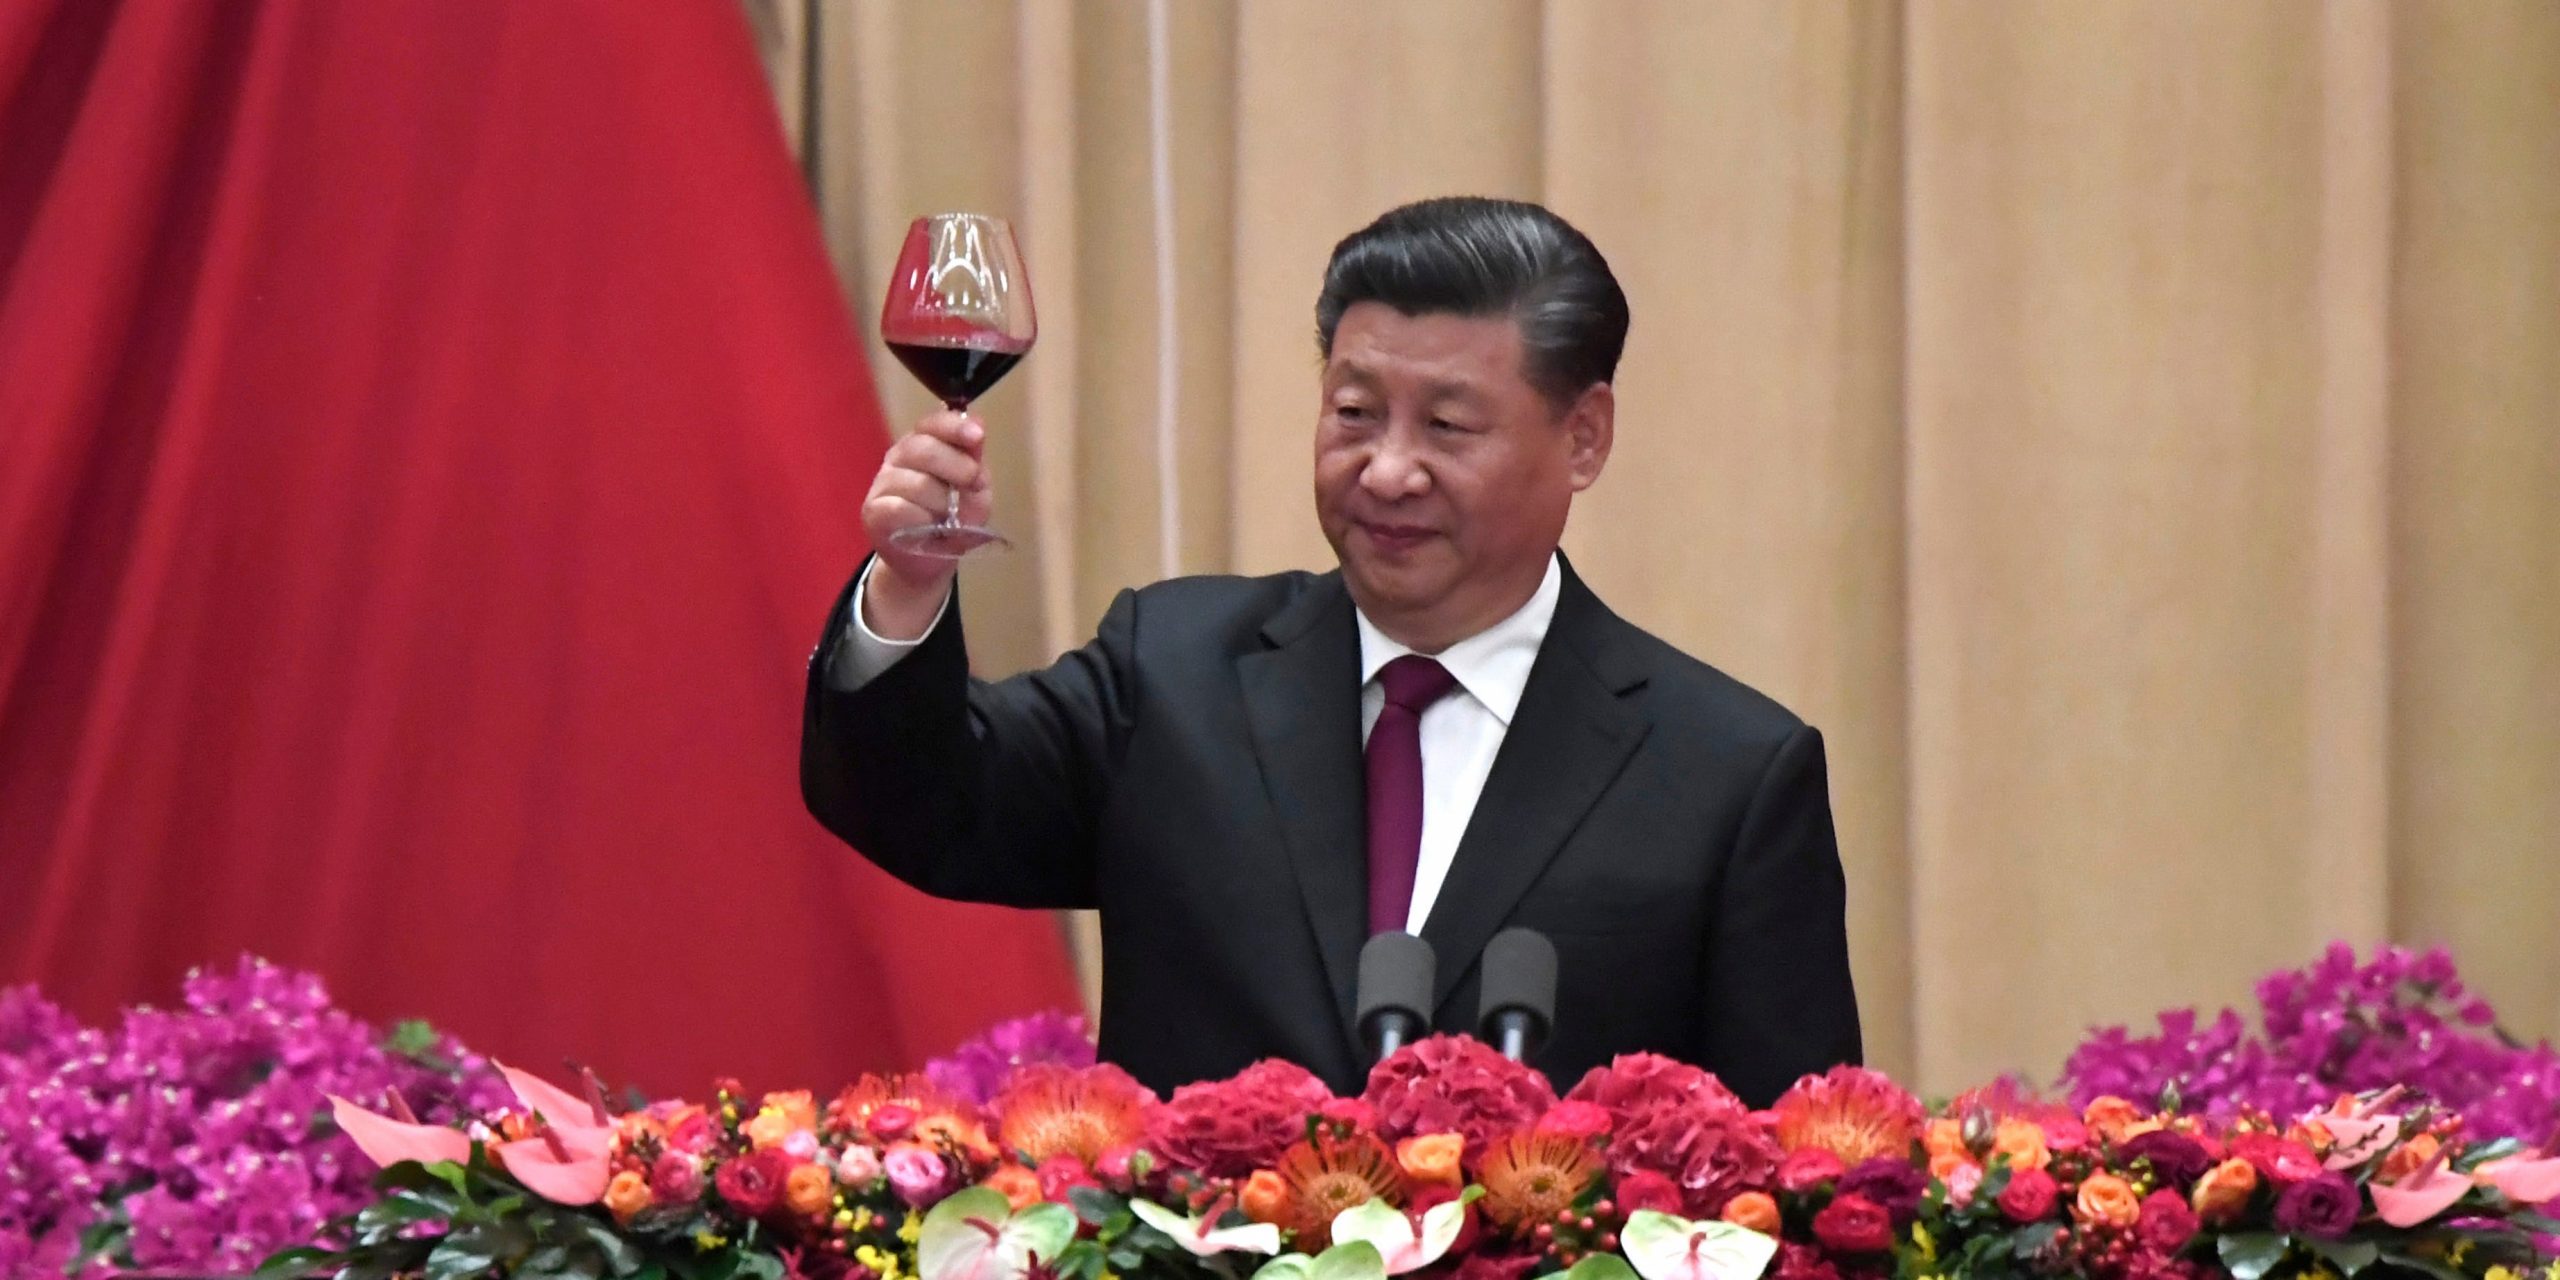 BEIJING, CHINA - SEPTEMBER 30: Chinese President Xi jinping toasts the guests during a banquet marking the 70th anniversary of the founding of the People's Republic of China on September 30, 2019 in Beijing, China. (Naohiko Hatta - Pool/Getty Images)